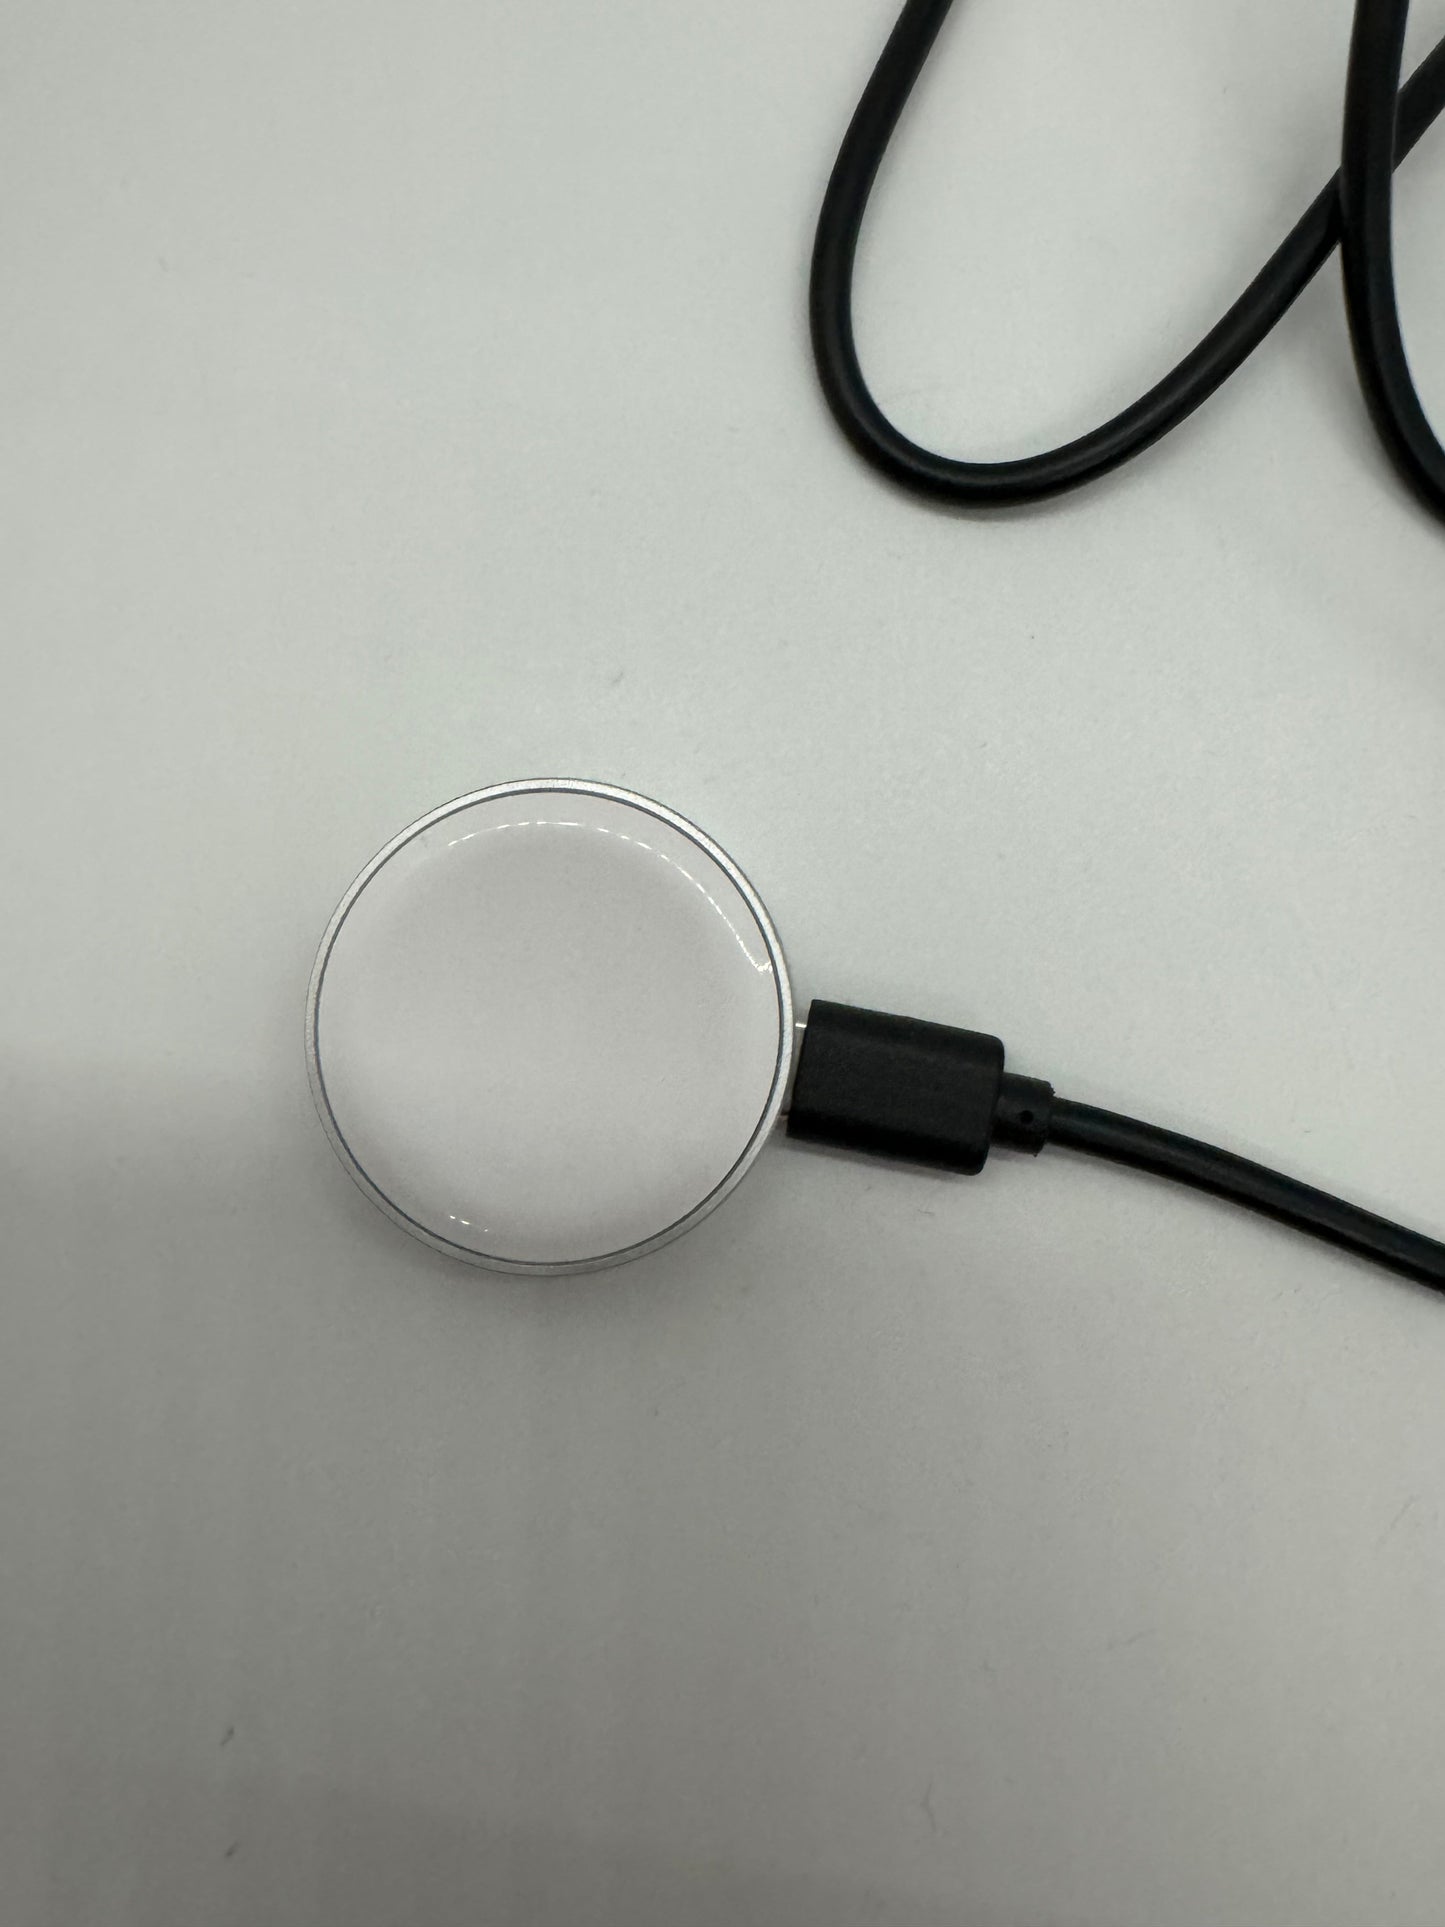 The picture shows a round, silver object that appears to be a wireless charger. It is placed on a white surface. There is a black cable attached to it, which has a black rectangular attachment near where the cable connects to the round object. The cable is coiled in the upper part of the picture.